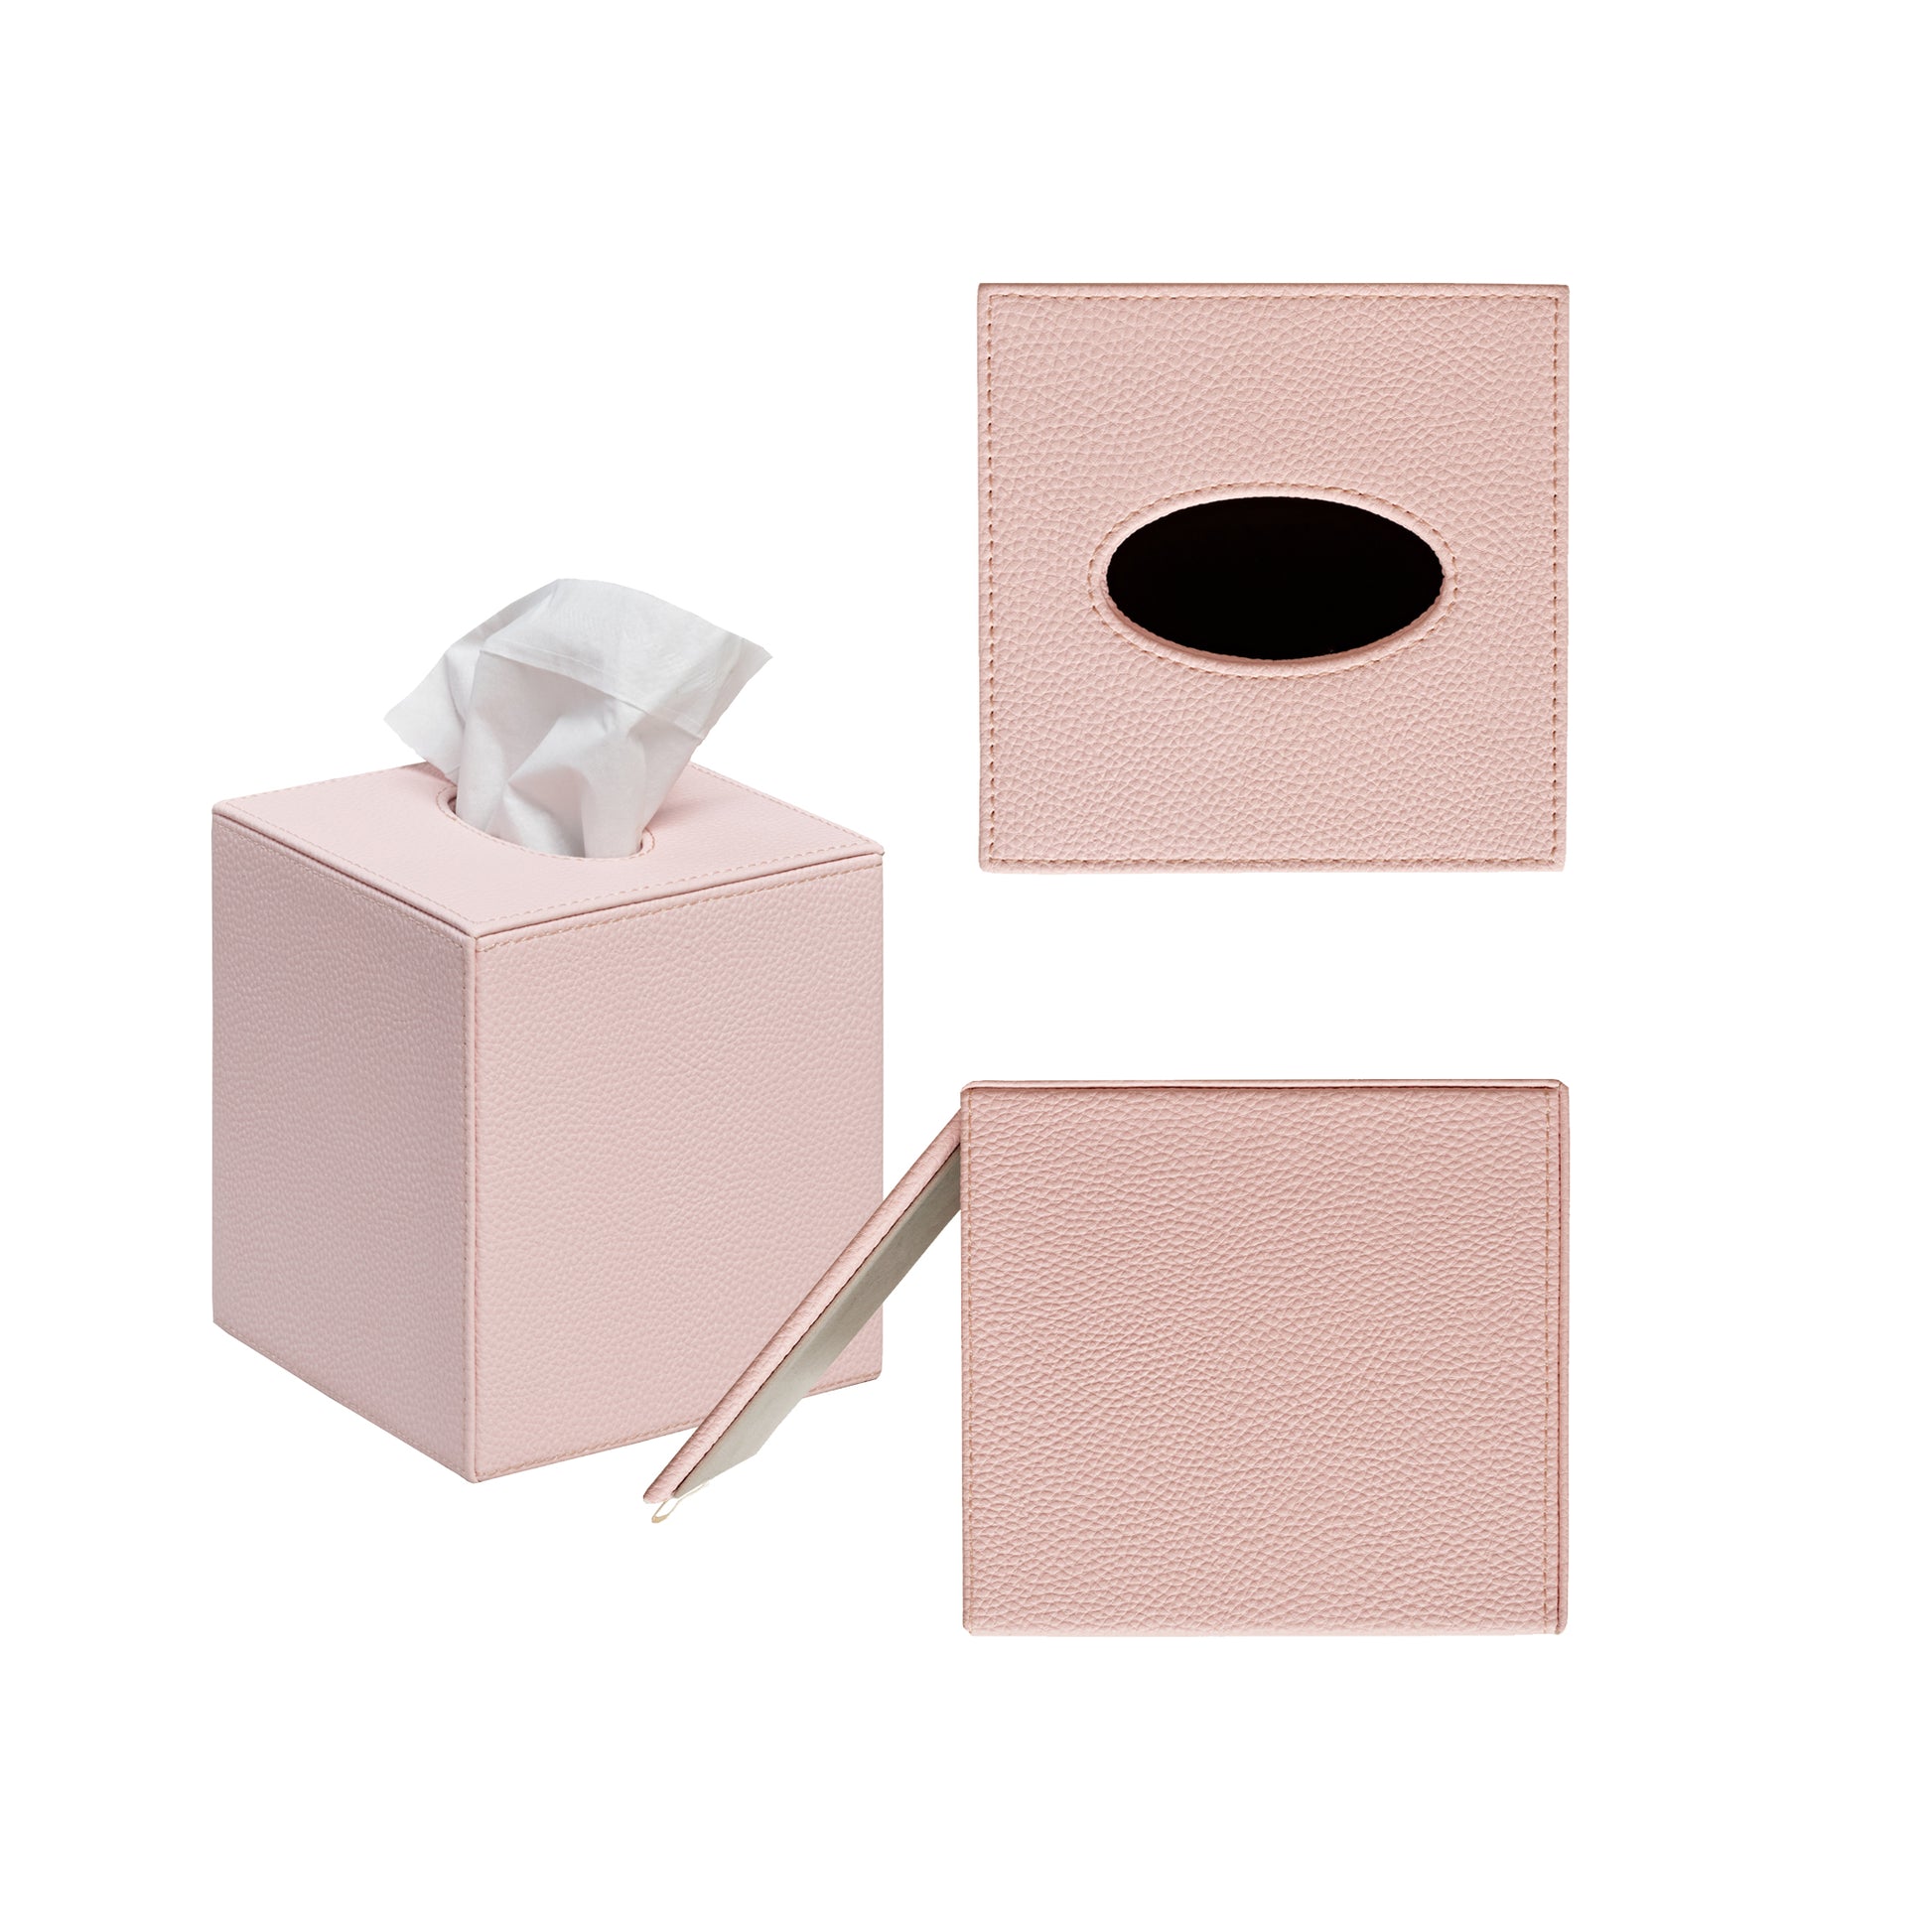 Faux Leather Tissue Box - Light Pink